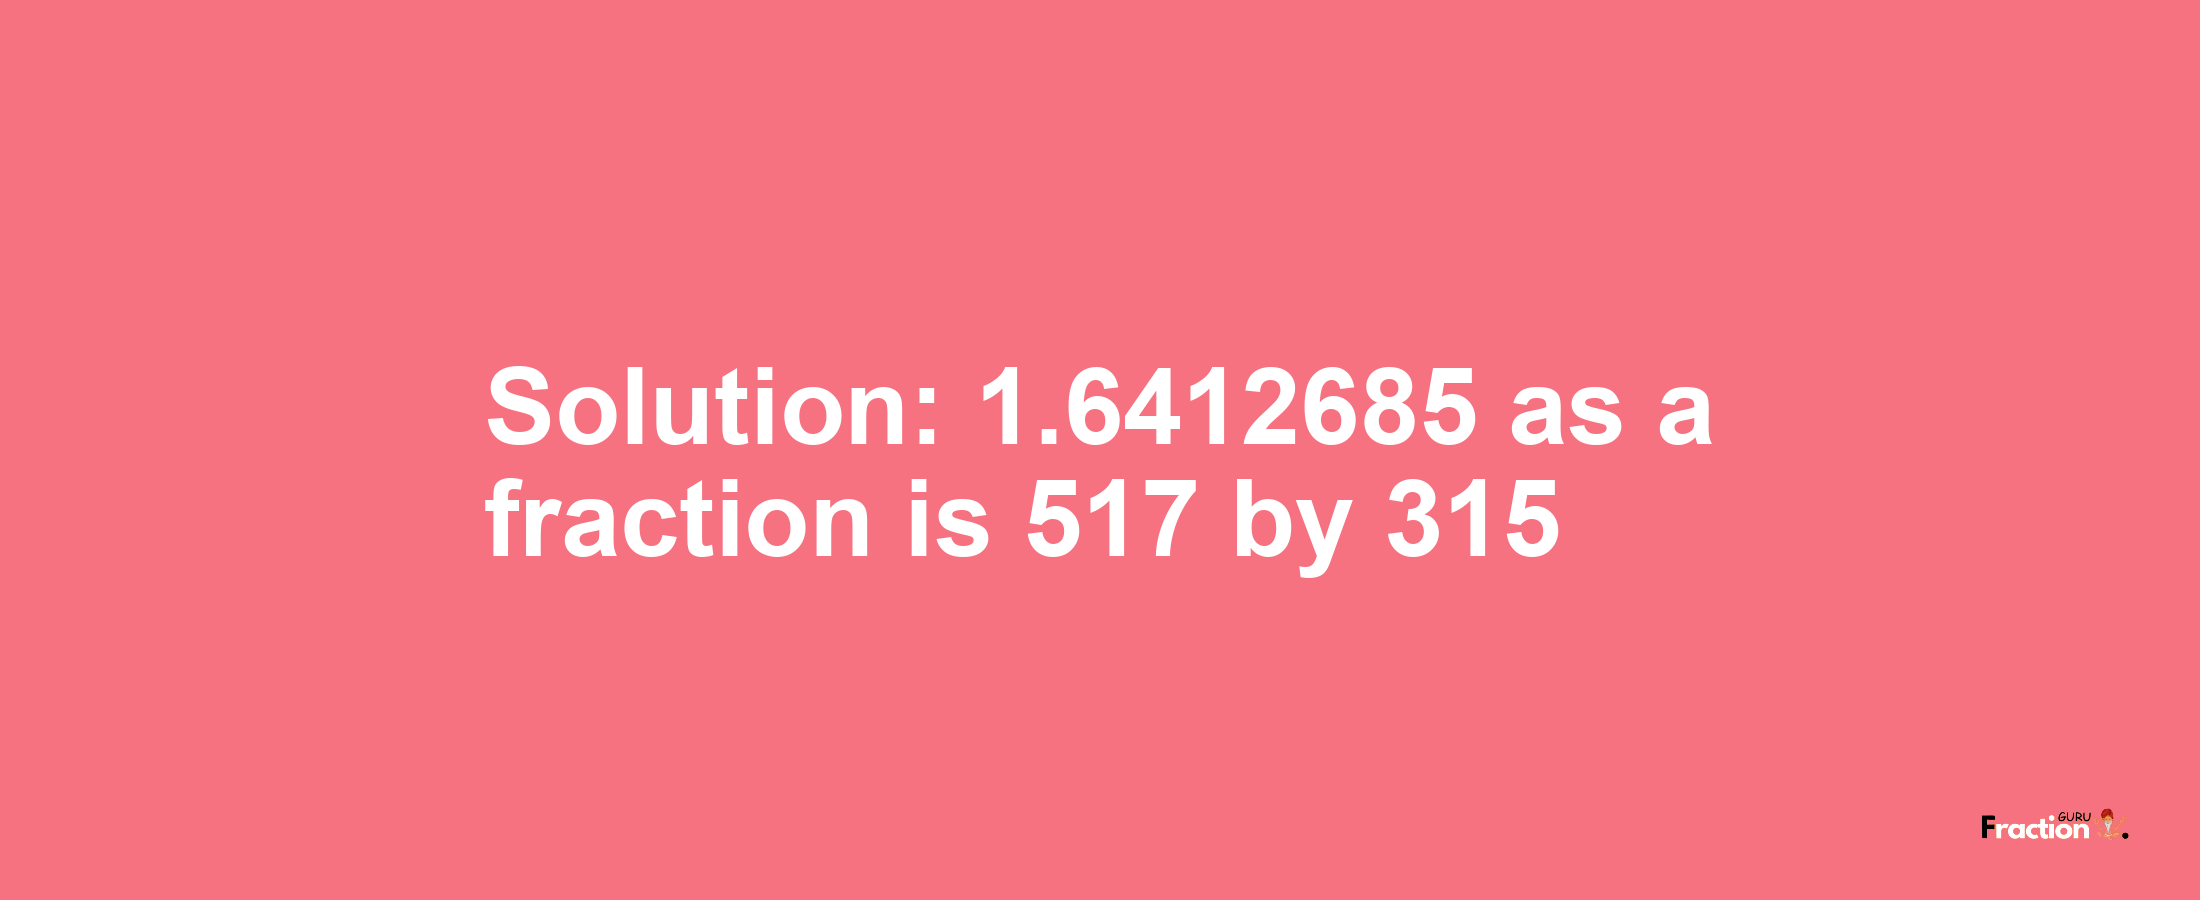 Solution:1.6412685 as a fraction is 517/315